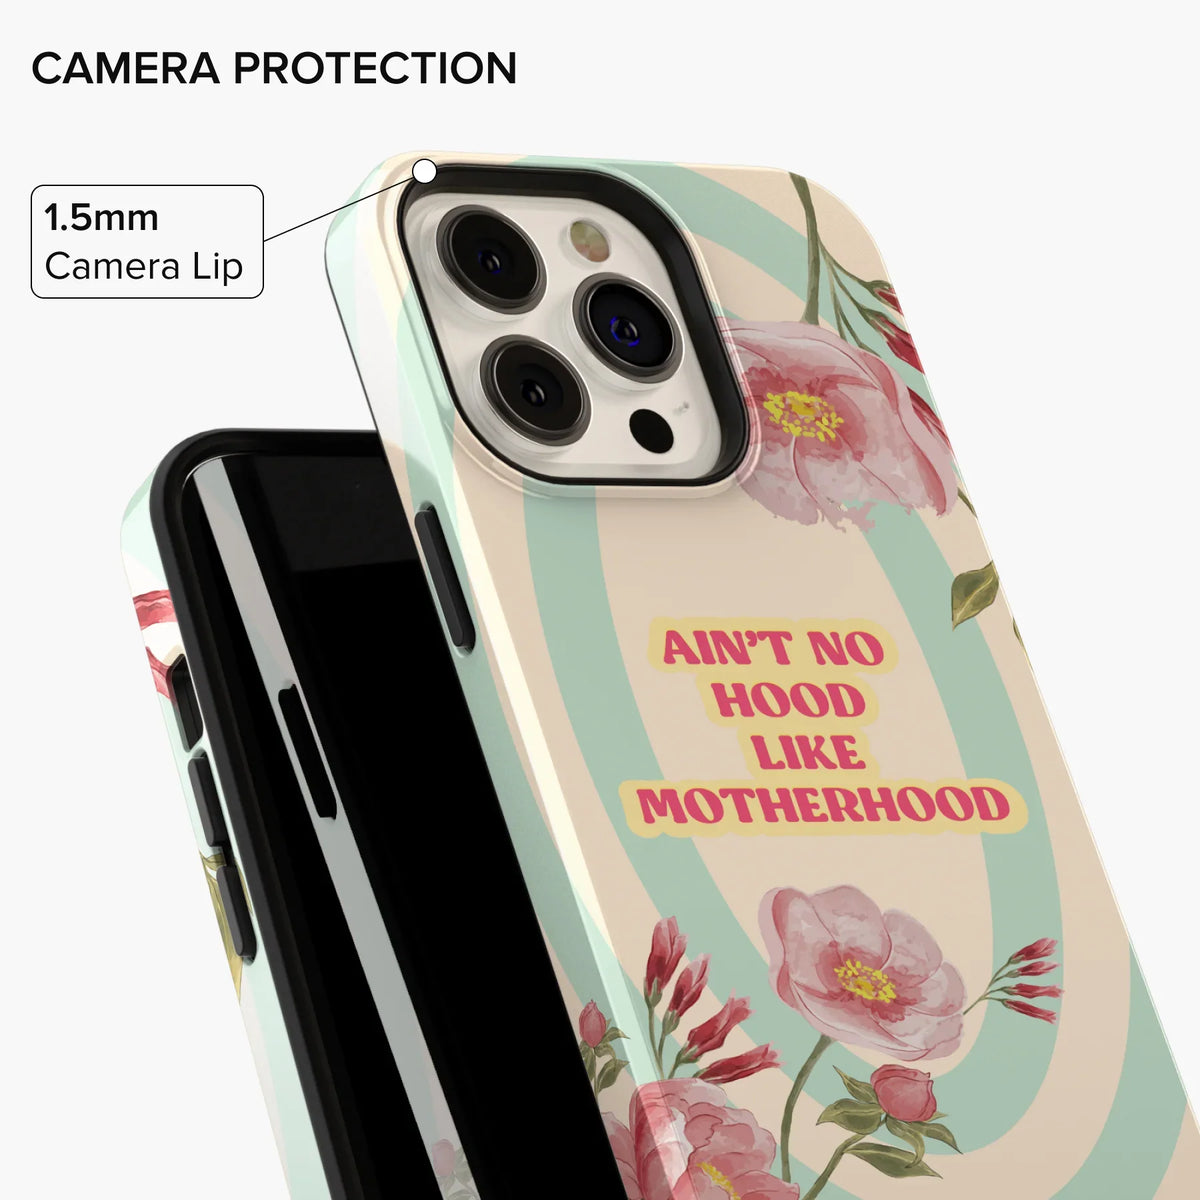 Ain't No Hood iPhone Case - Select a Device